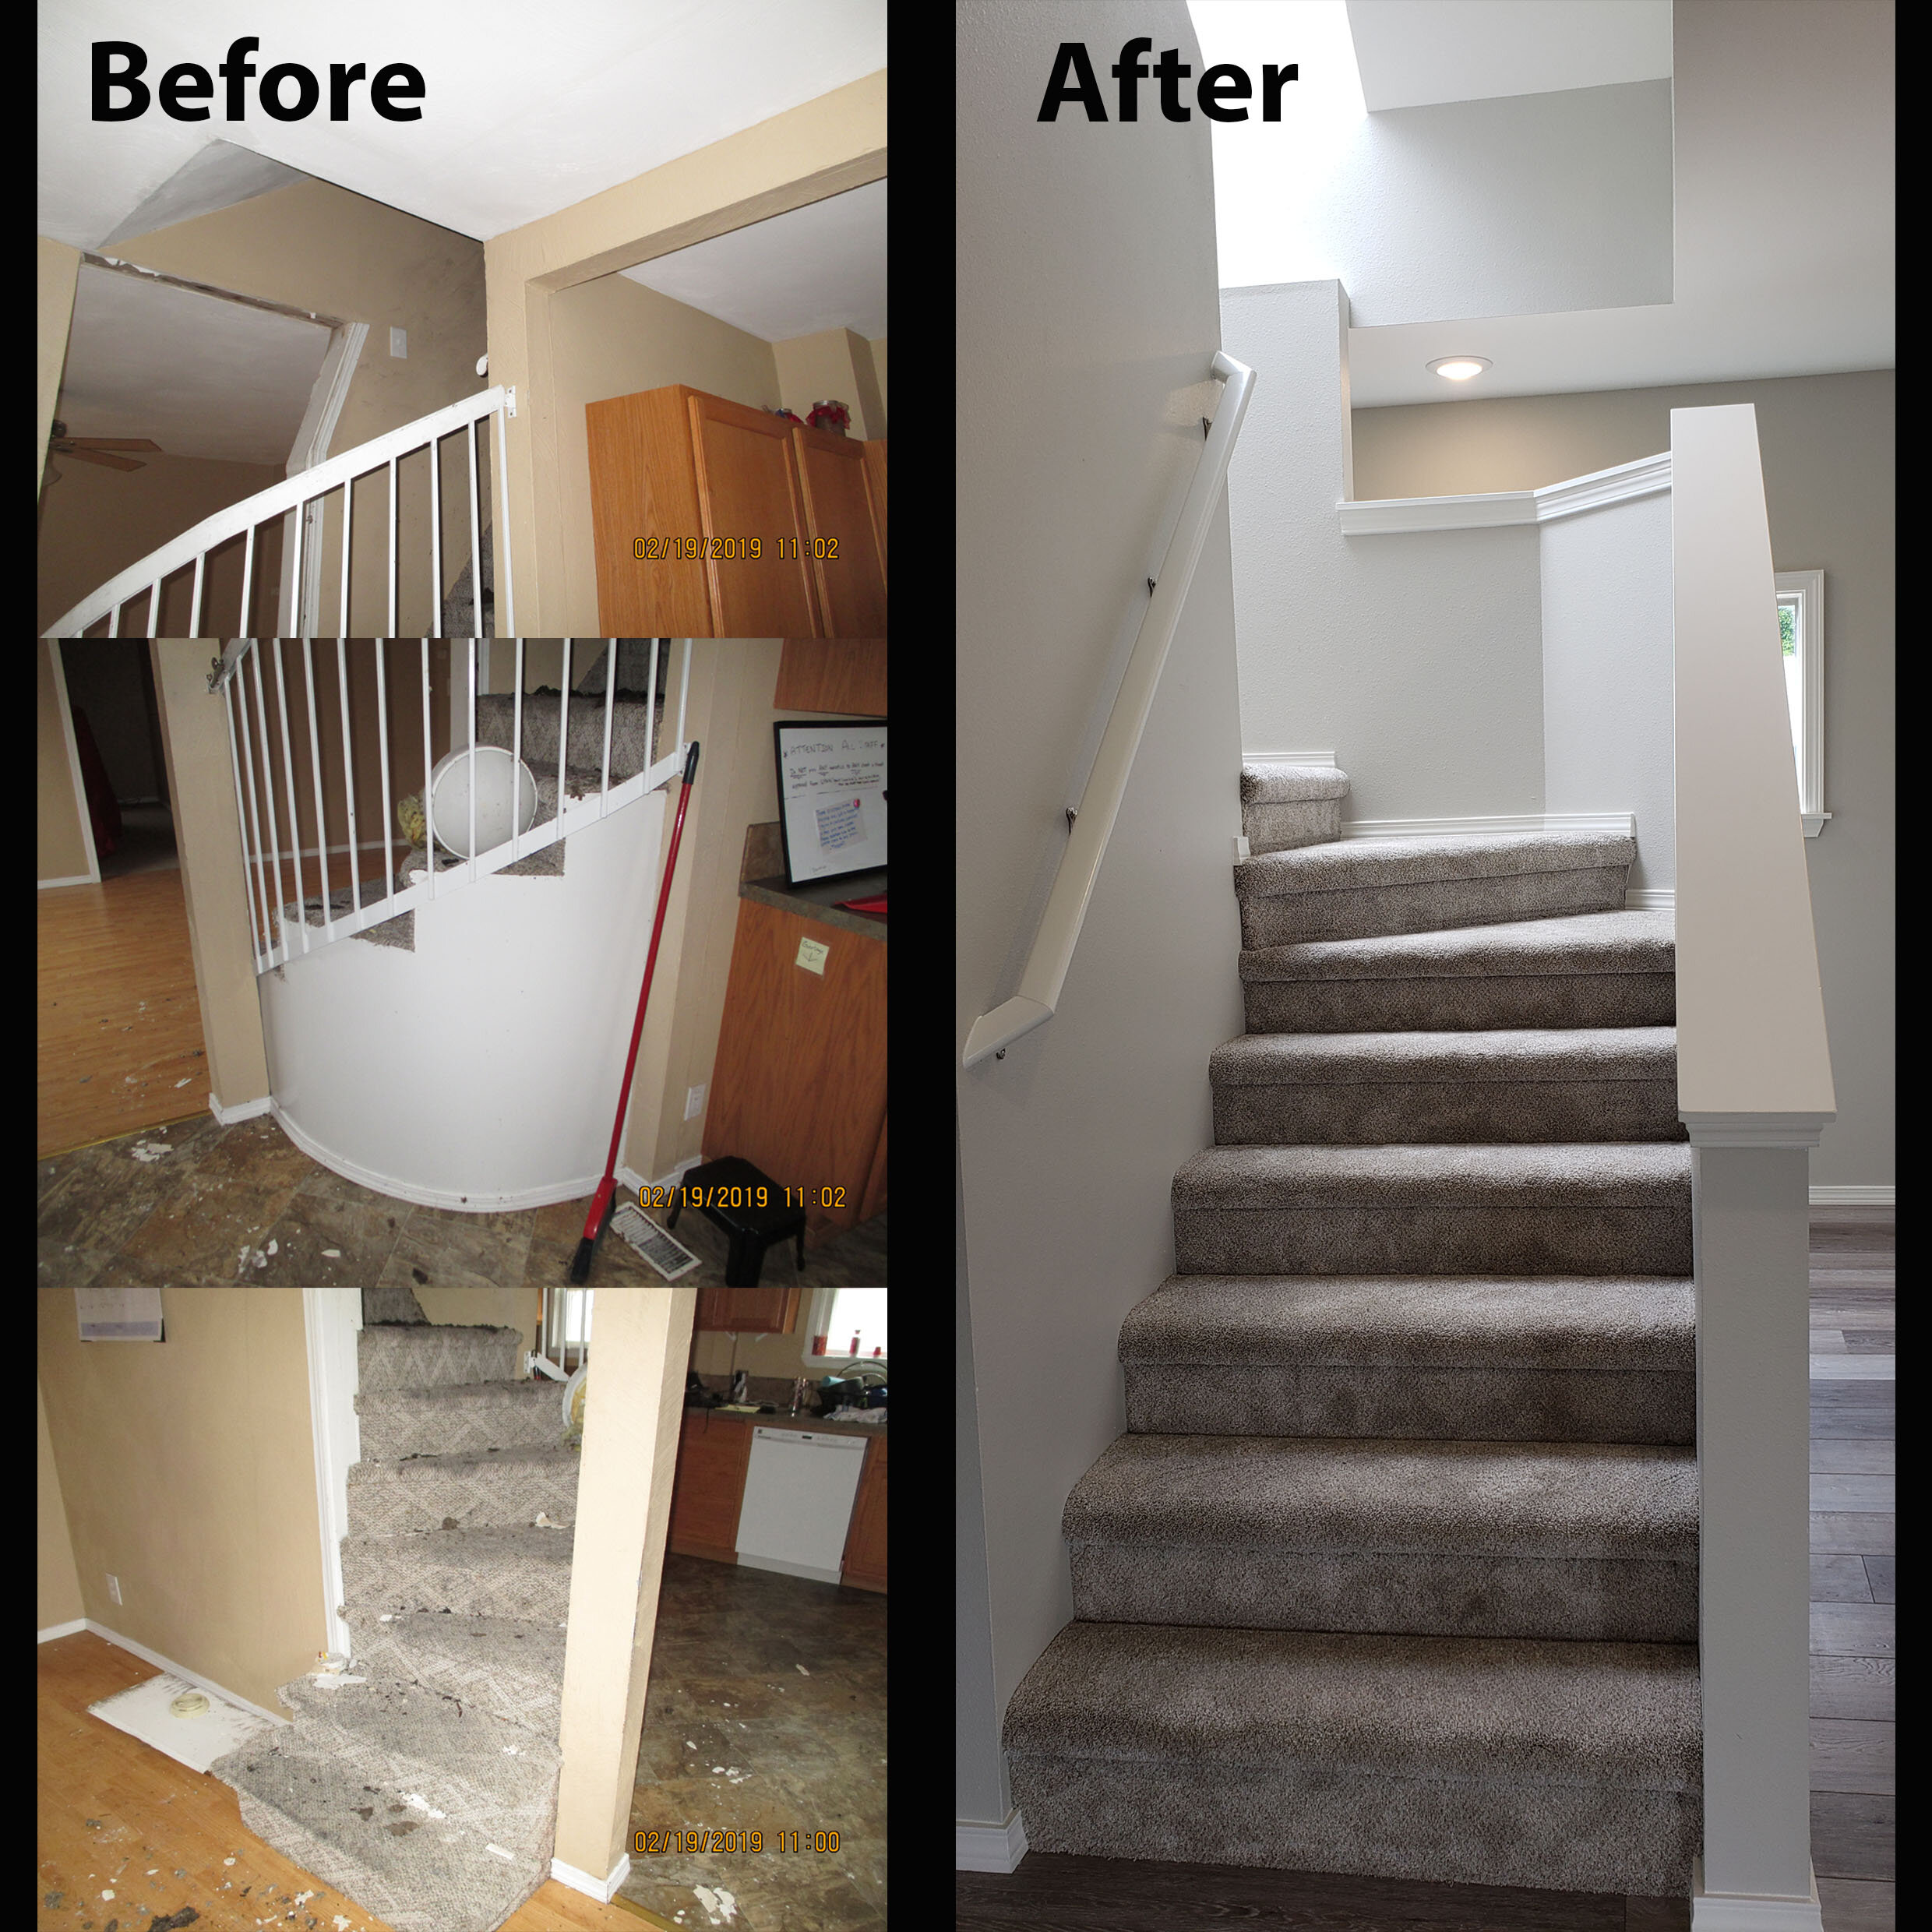 Before After staircase.jpg